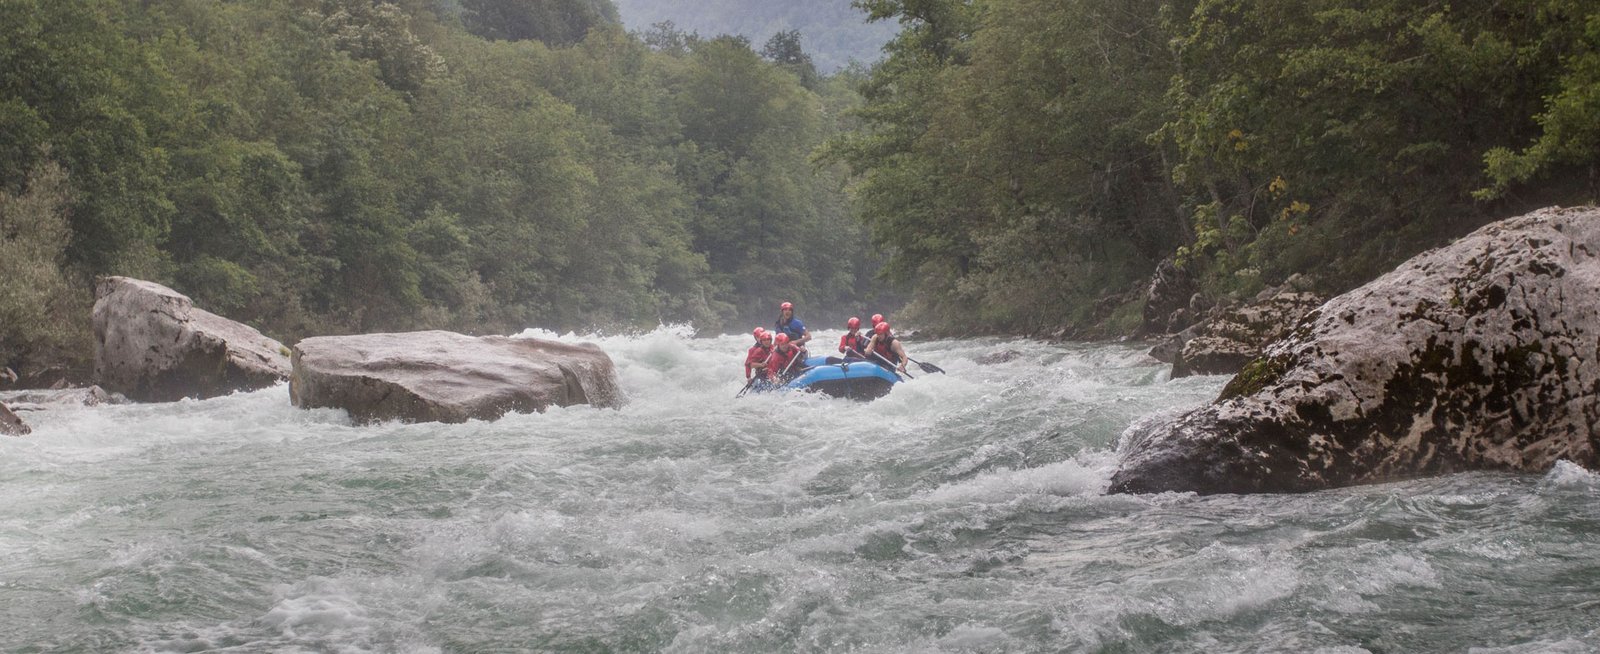 When is the best time to go rafting on the Tara